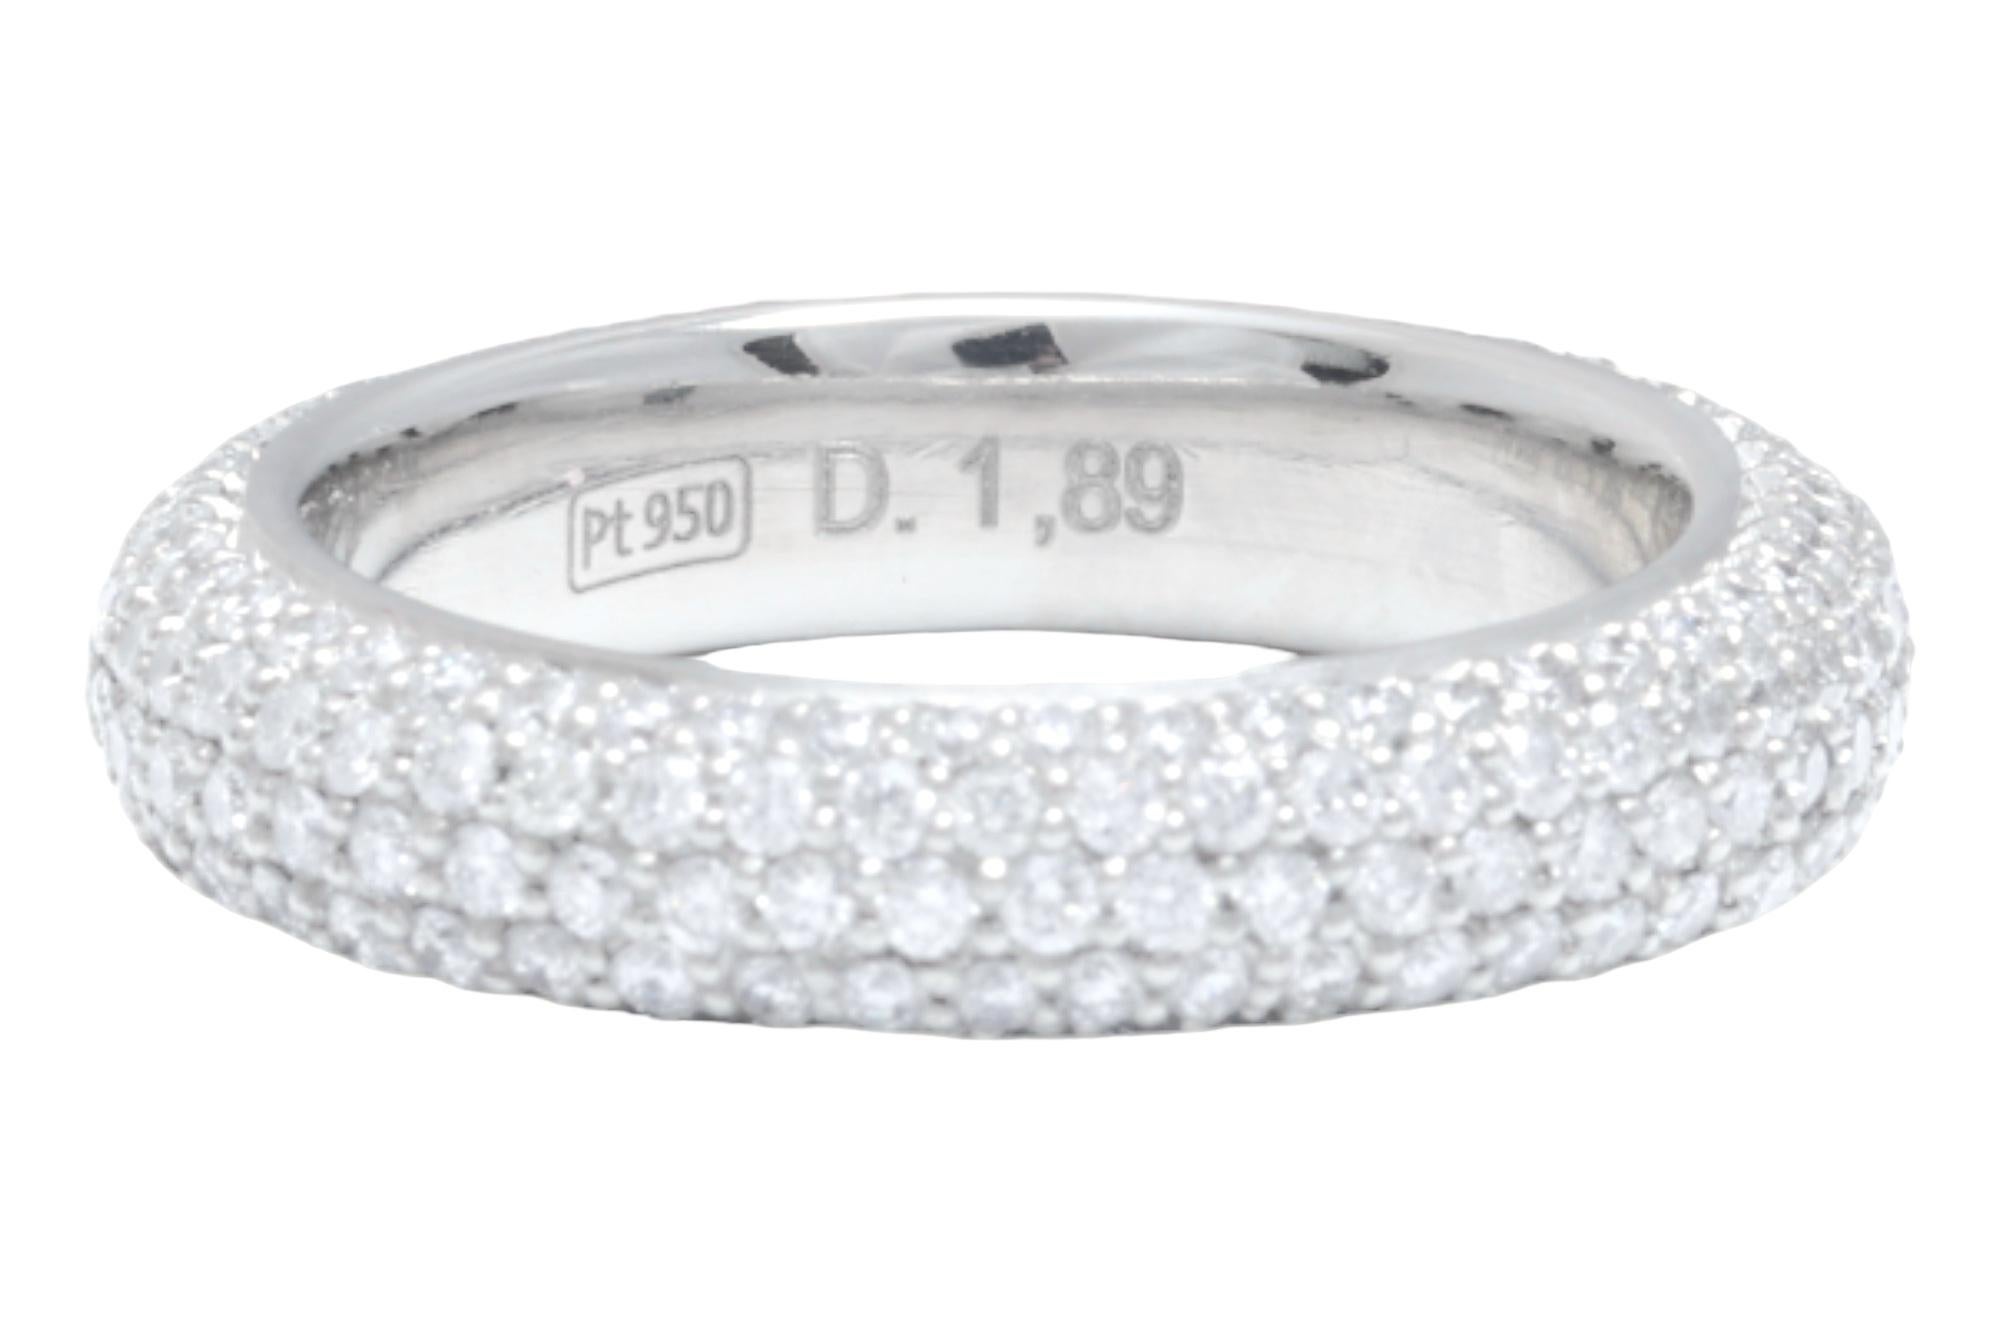 Magnificent Platinum Eternity Ring with 1.89 ct. Diamonds Completely Hand Made

Diamonds: Brilliant cut diamonds 1.89 ct. diamonds 

Material: Solid Platinum

Ring size: 55 EU / 7.25 US (another can be ordered on another measure)

Total weight: 12.3